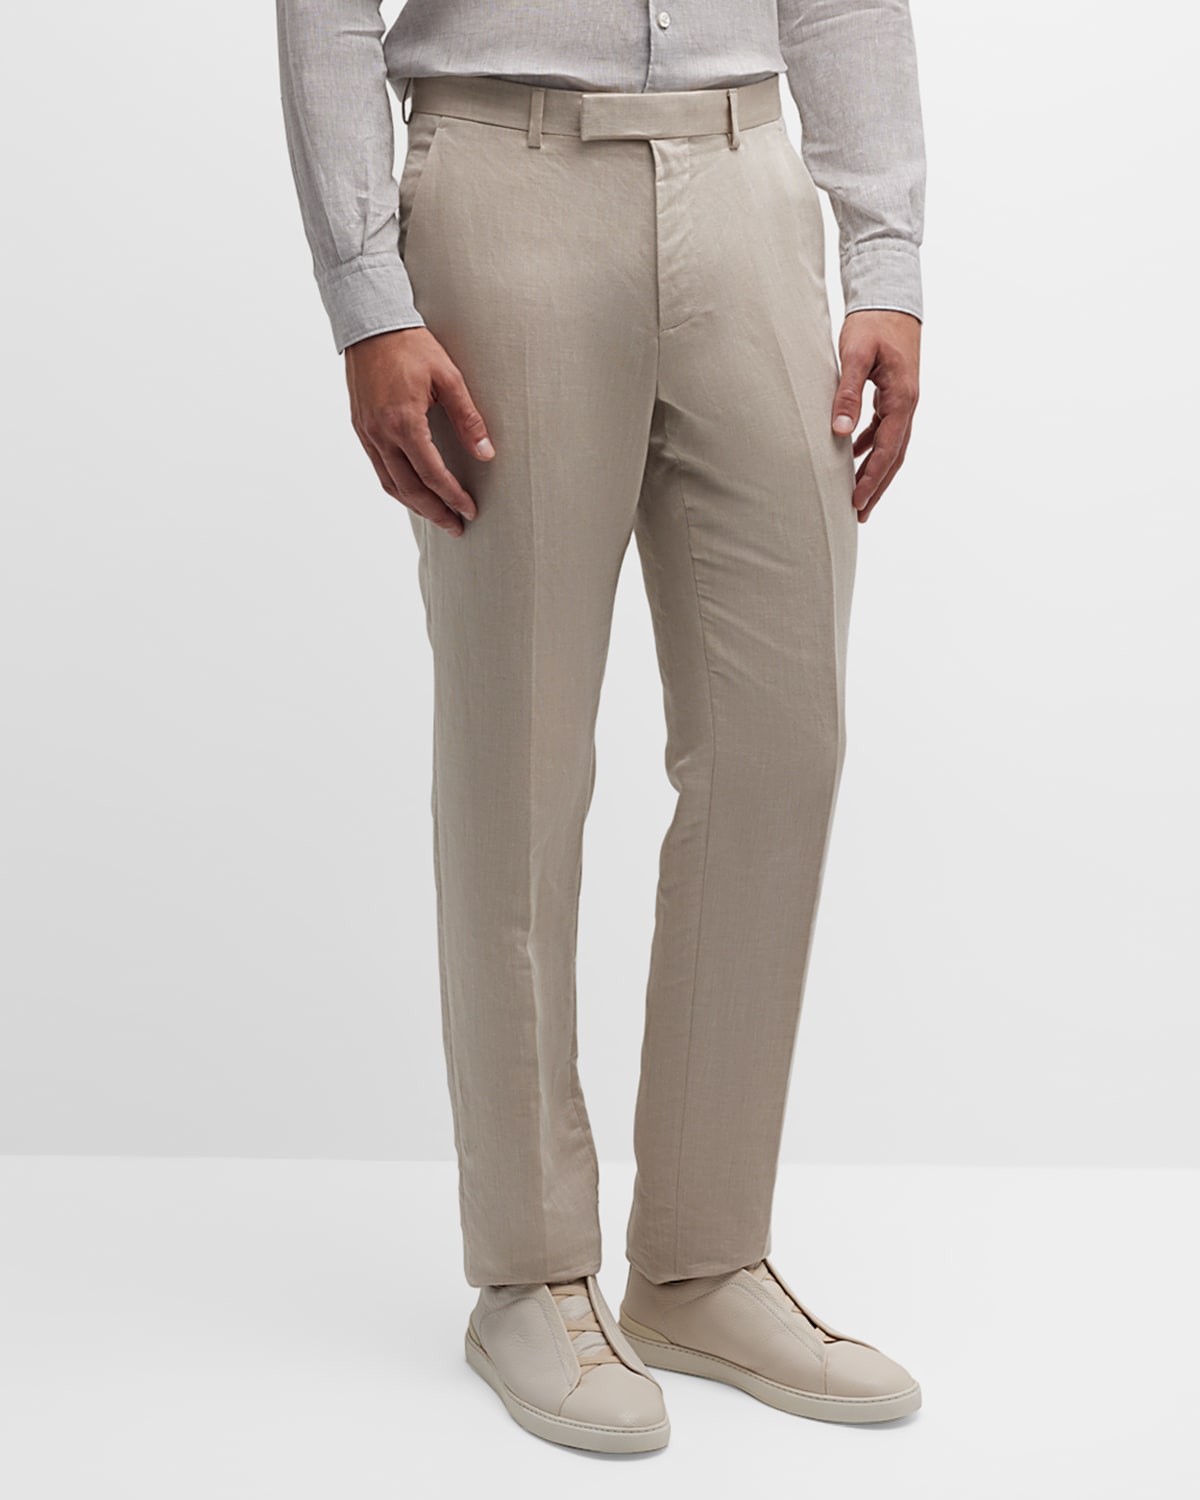 Zegna Tapered Wool Chino Trousers - Farfetch